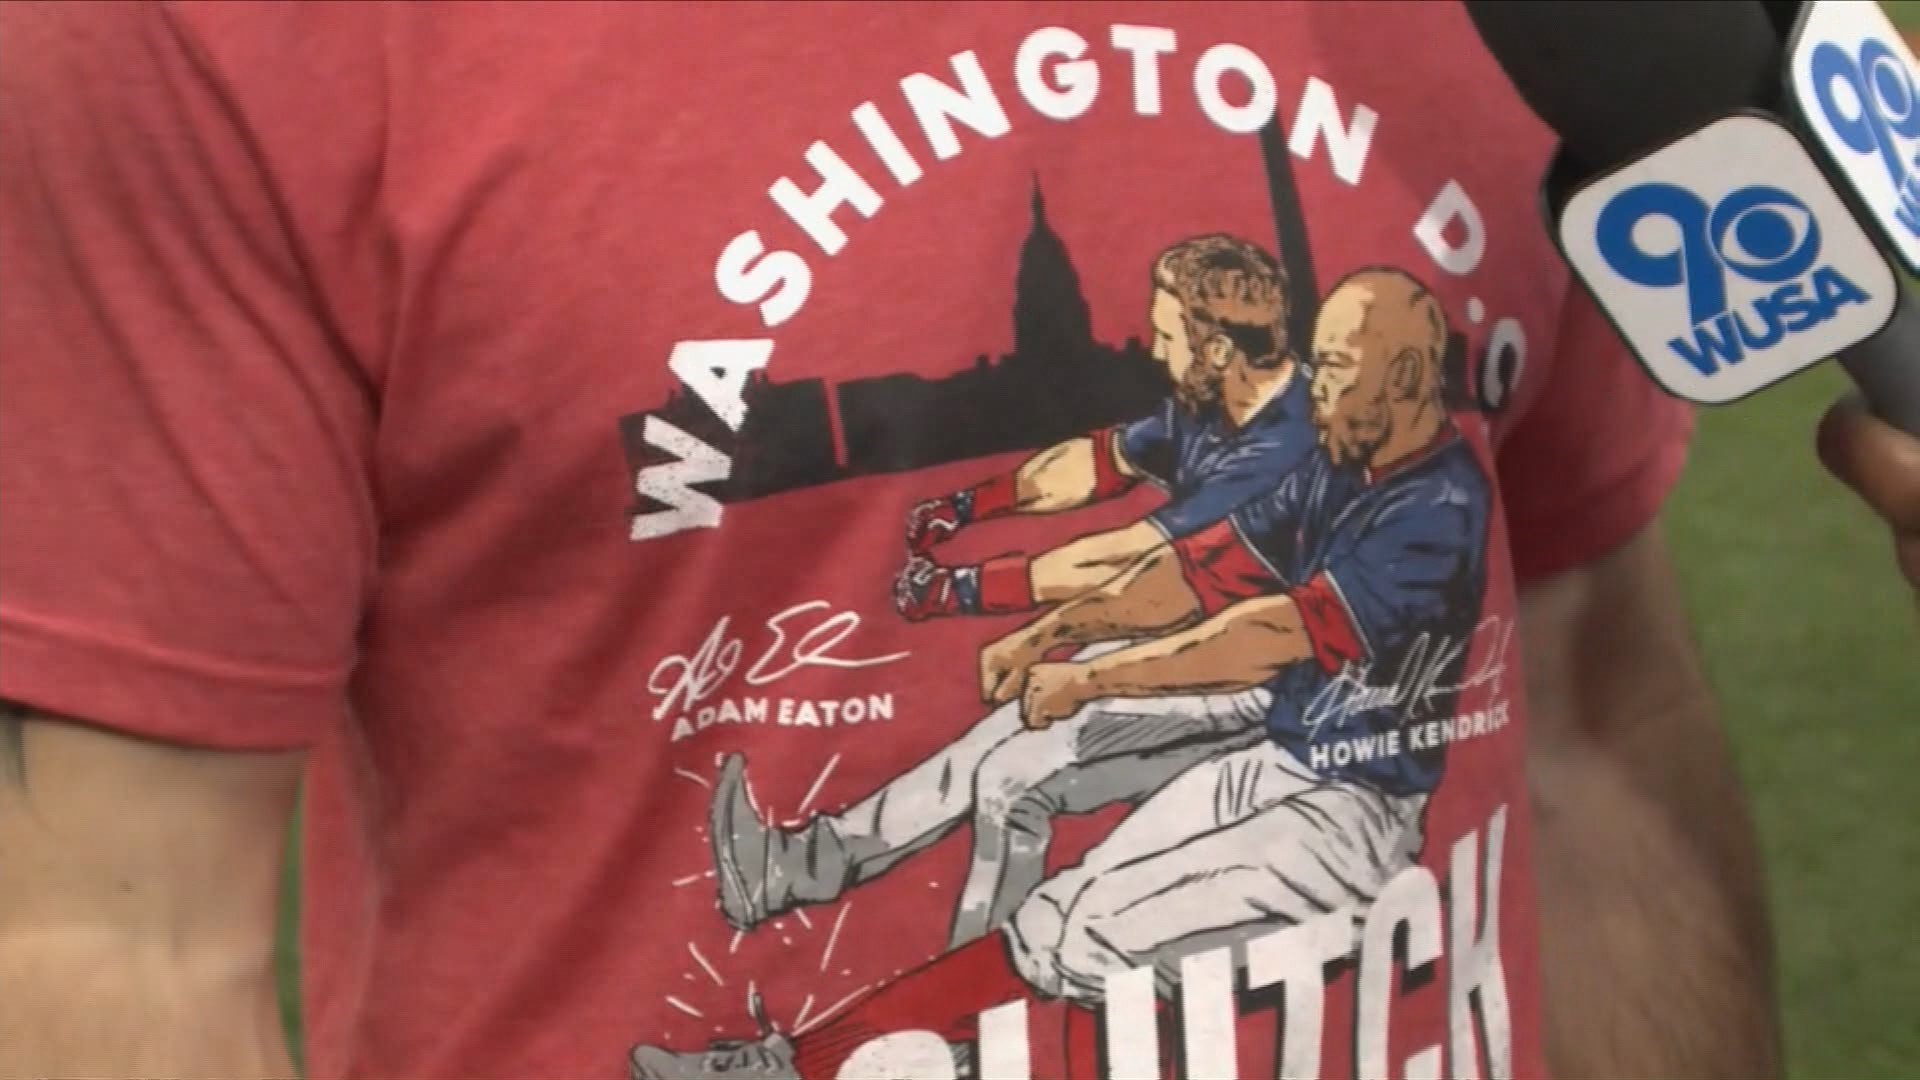 The Washington Nationals dugout dance that had the internet going crazy is now forever memorialized on a t-shirt.